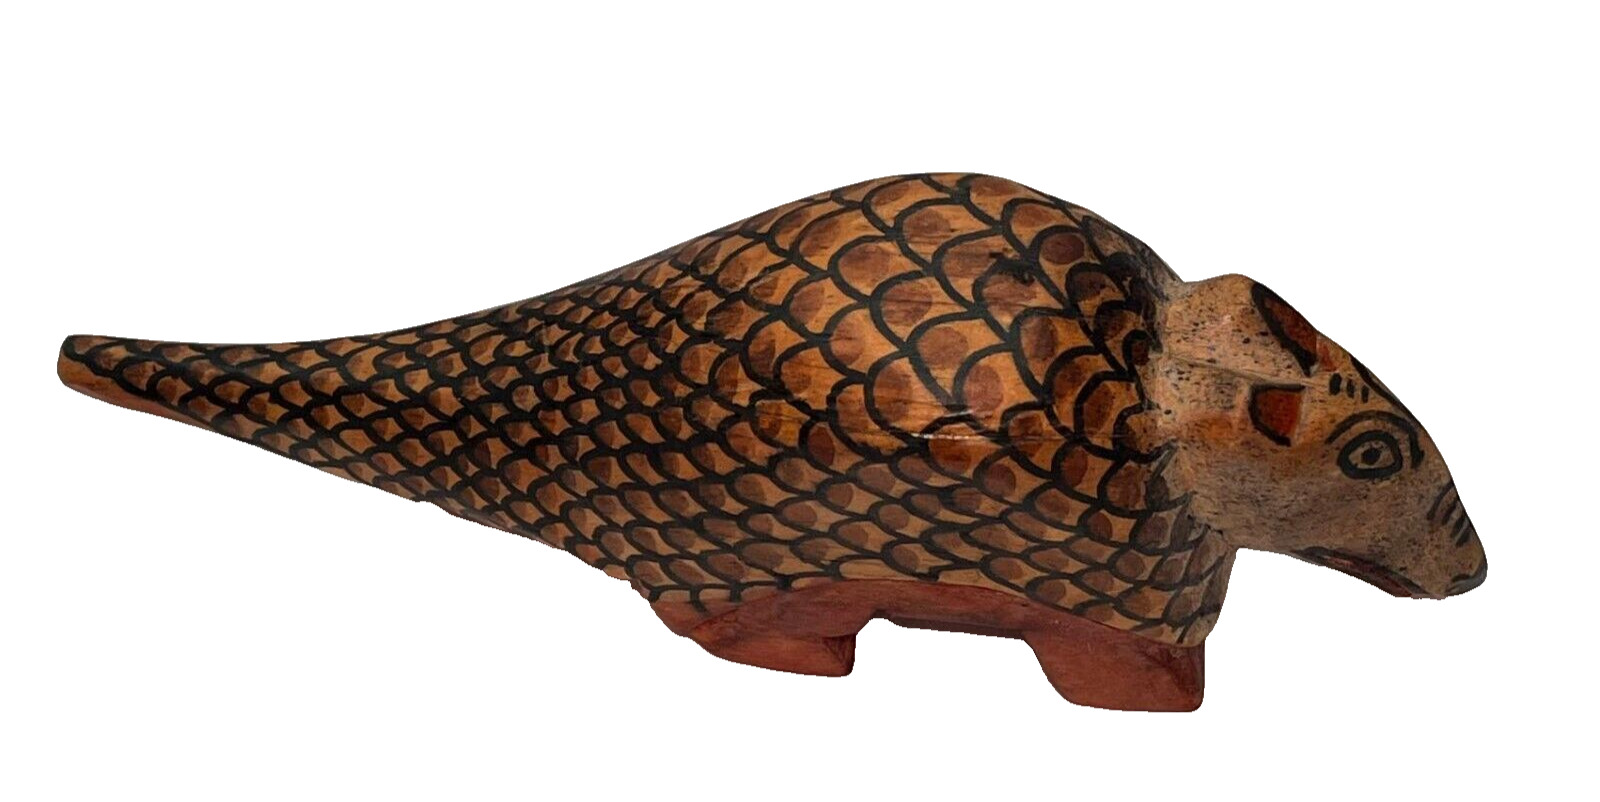 Vintage Wood Armadillo Figurine Hand Carved & Painted Folk Art Home Décor Gift